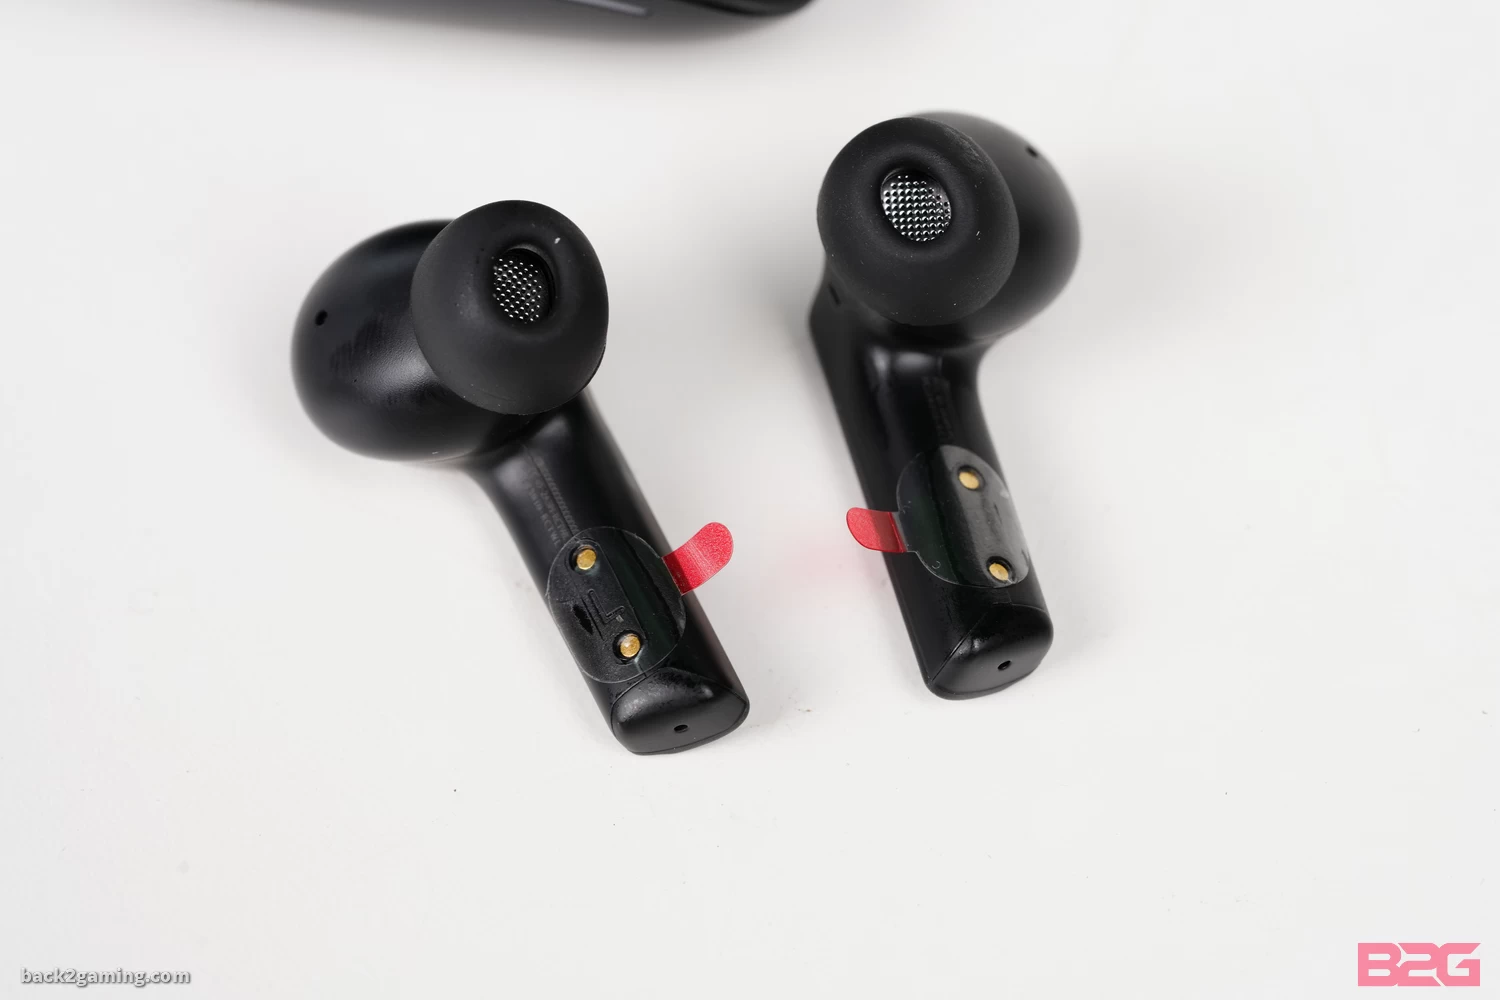 ROG Cetra True Wireless Gaming Earbuds Review -